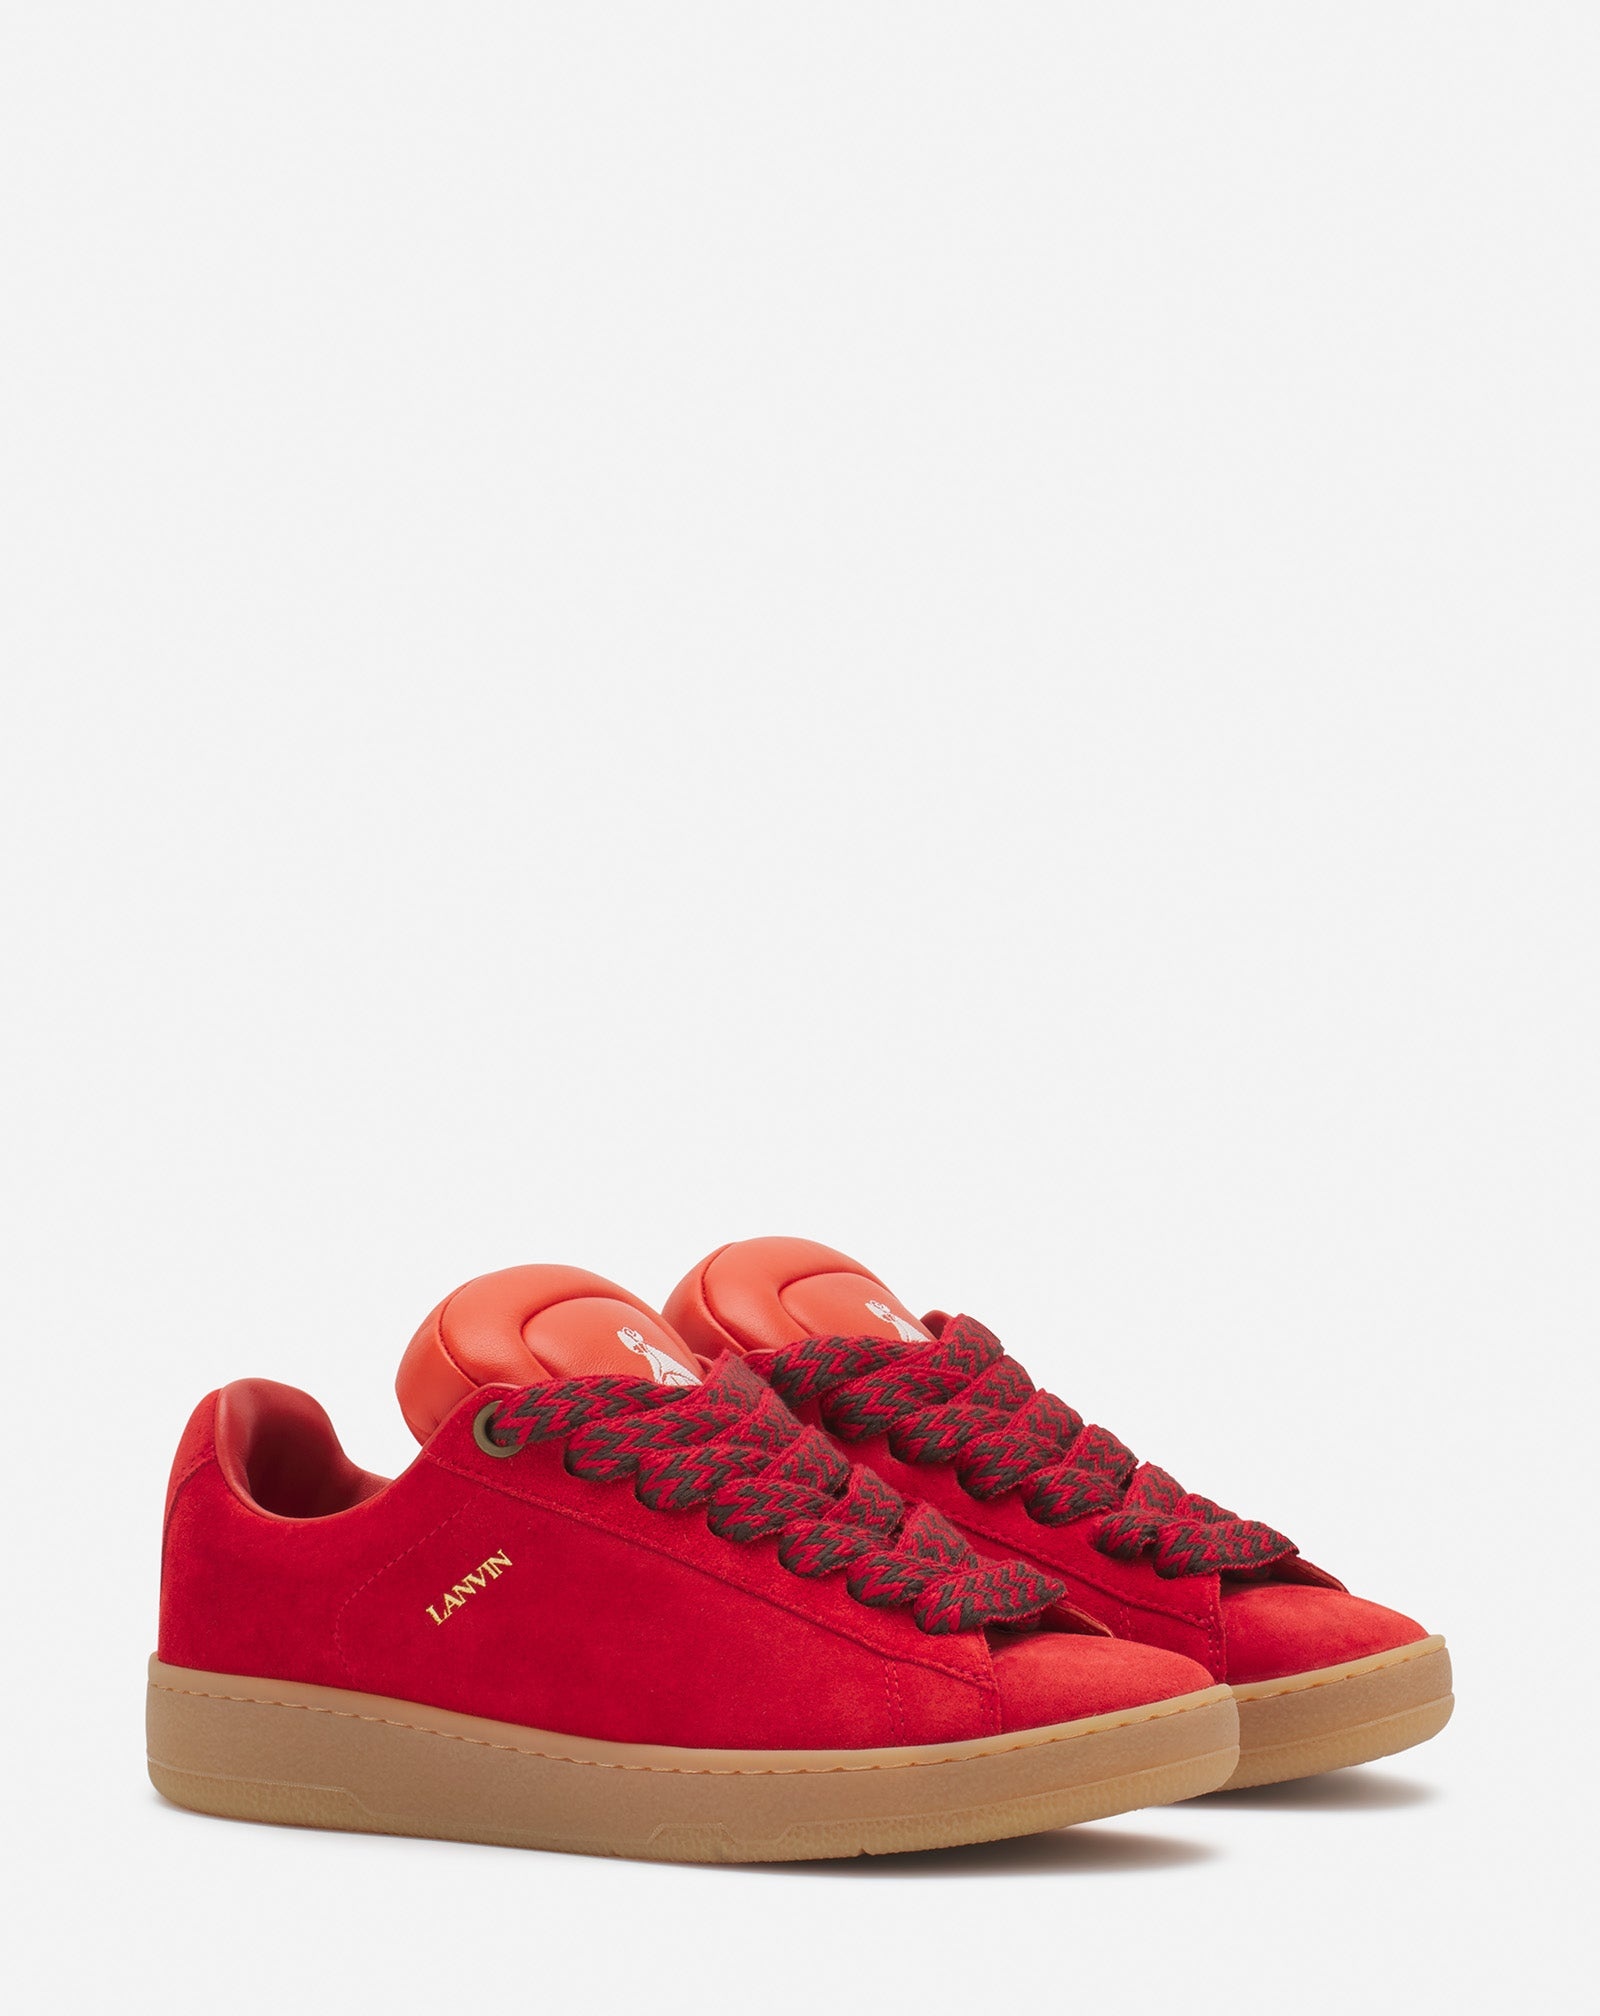 LANVIN X FUTURE HYPER CURB SNEAKERS IN LEATHER AND SUEDE FOR WOMEN - 2